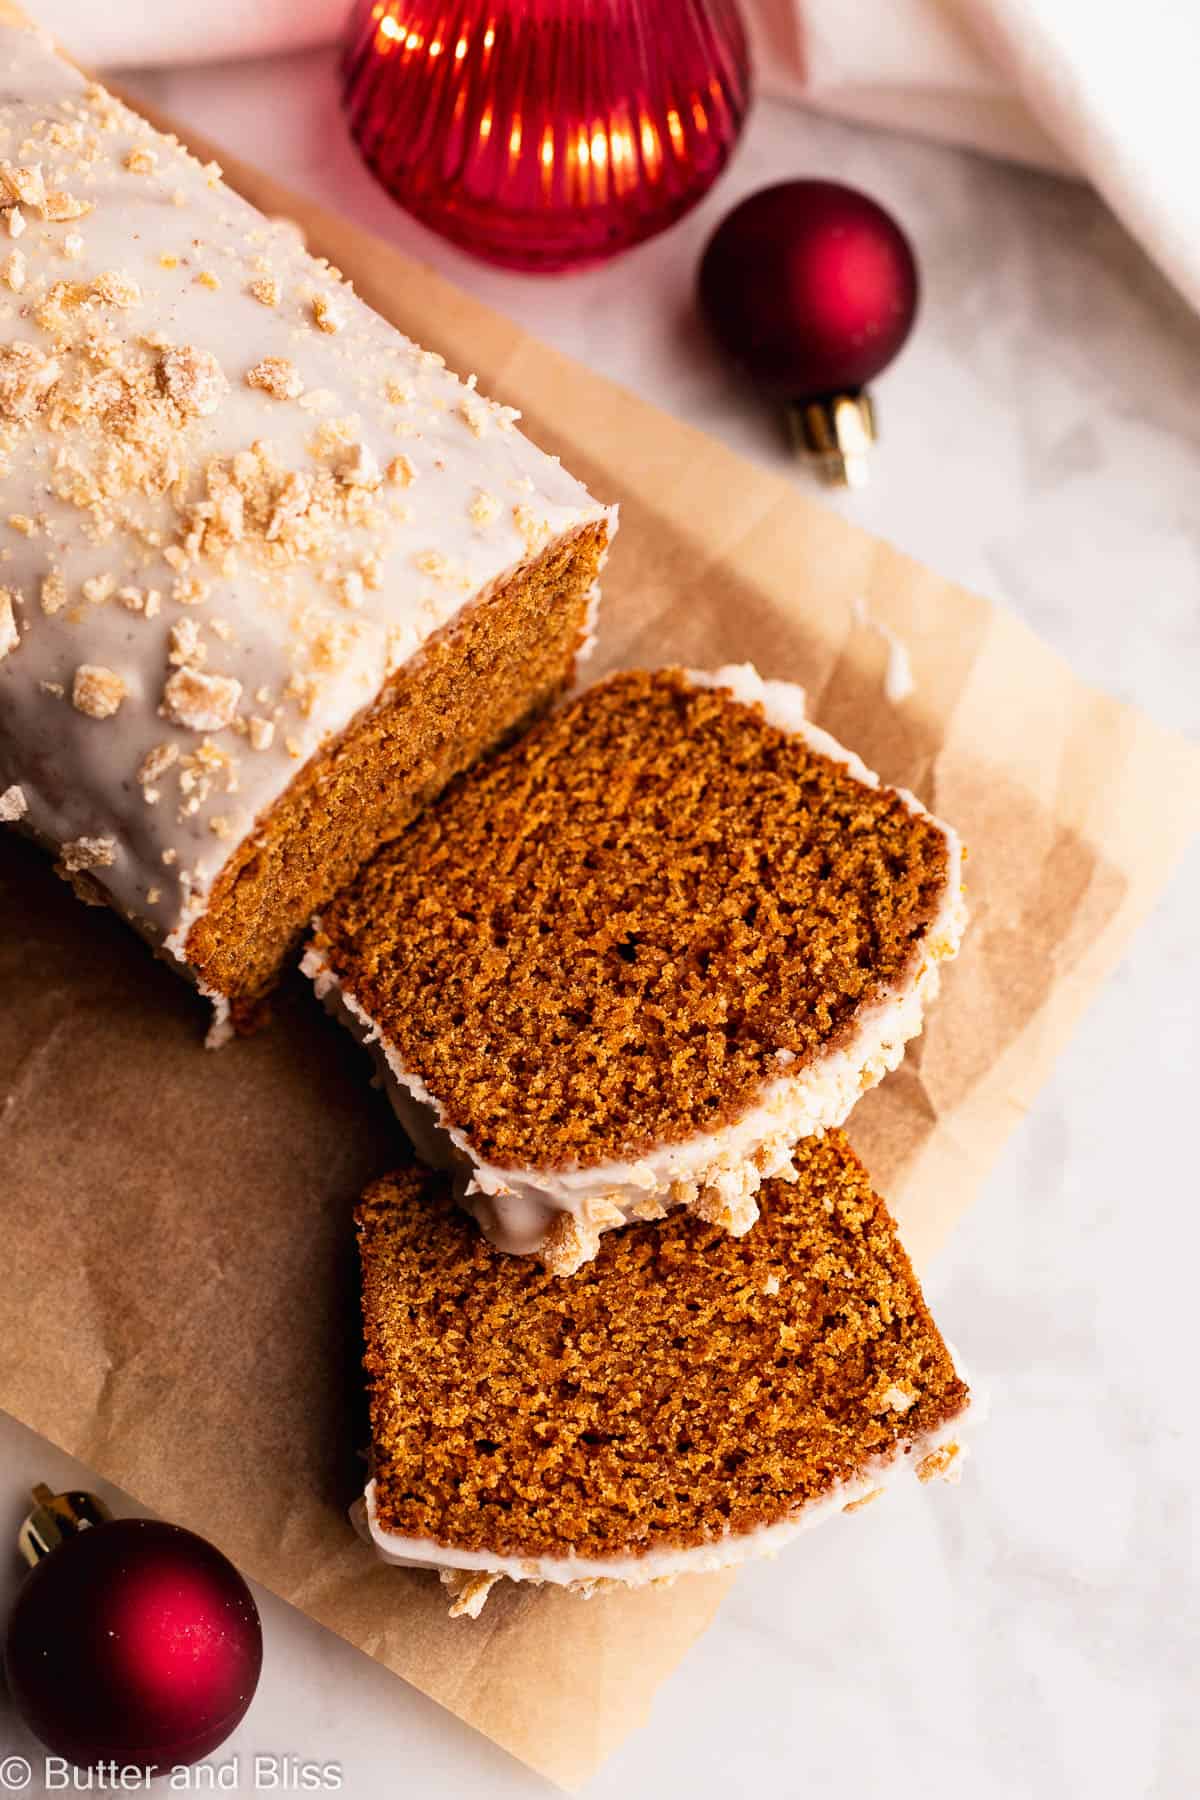 Two slices of gingerbread cut from the larger gluten free loaf arranged on parchment paper.